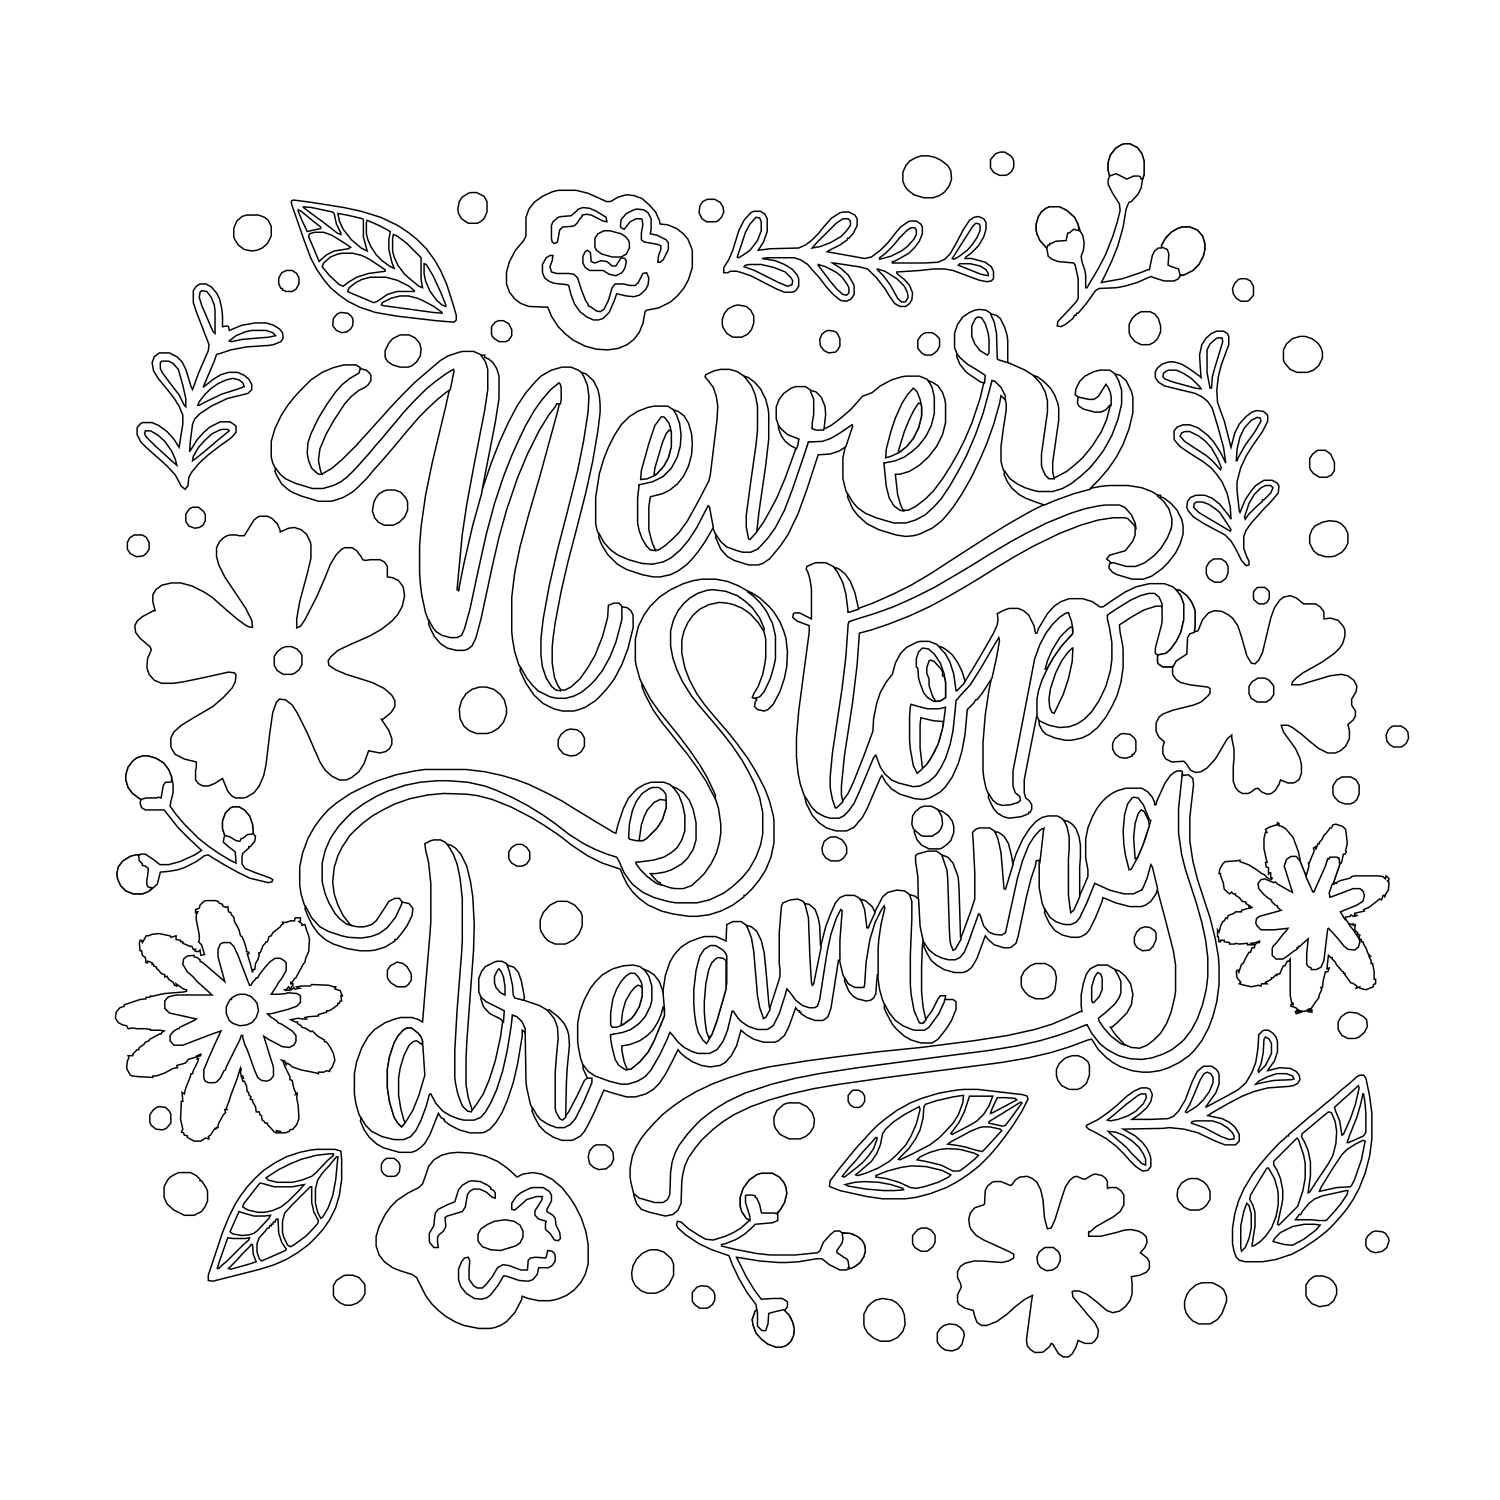 Printable never stop dreaming coloring page